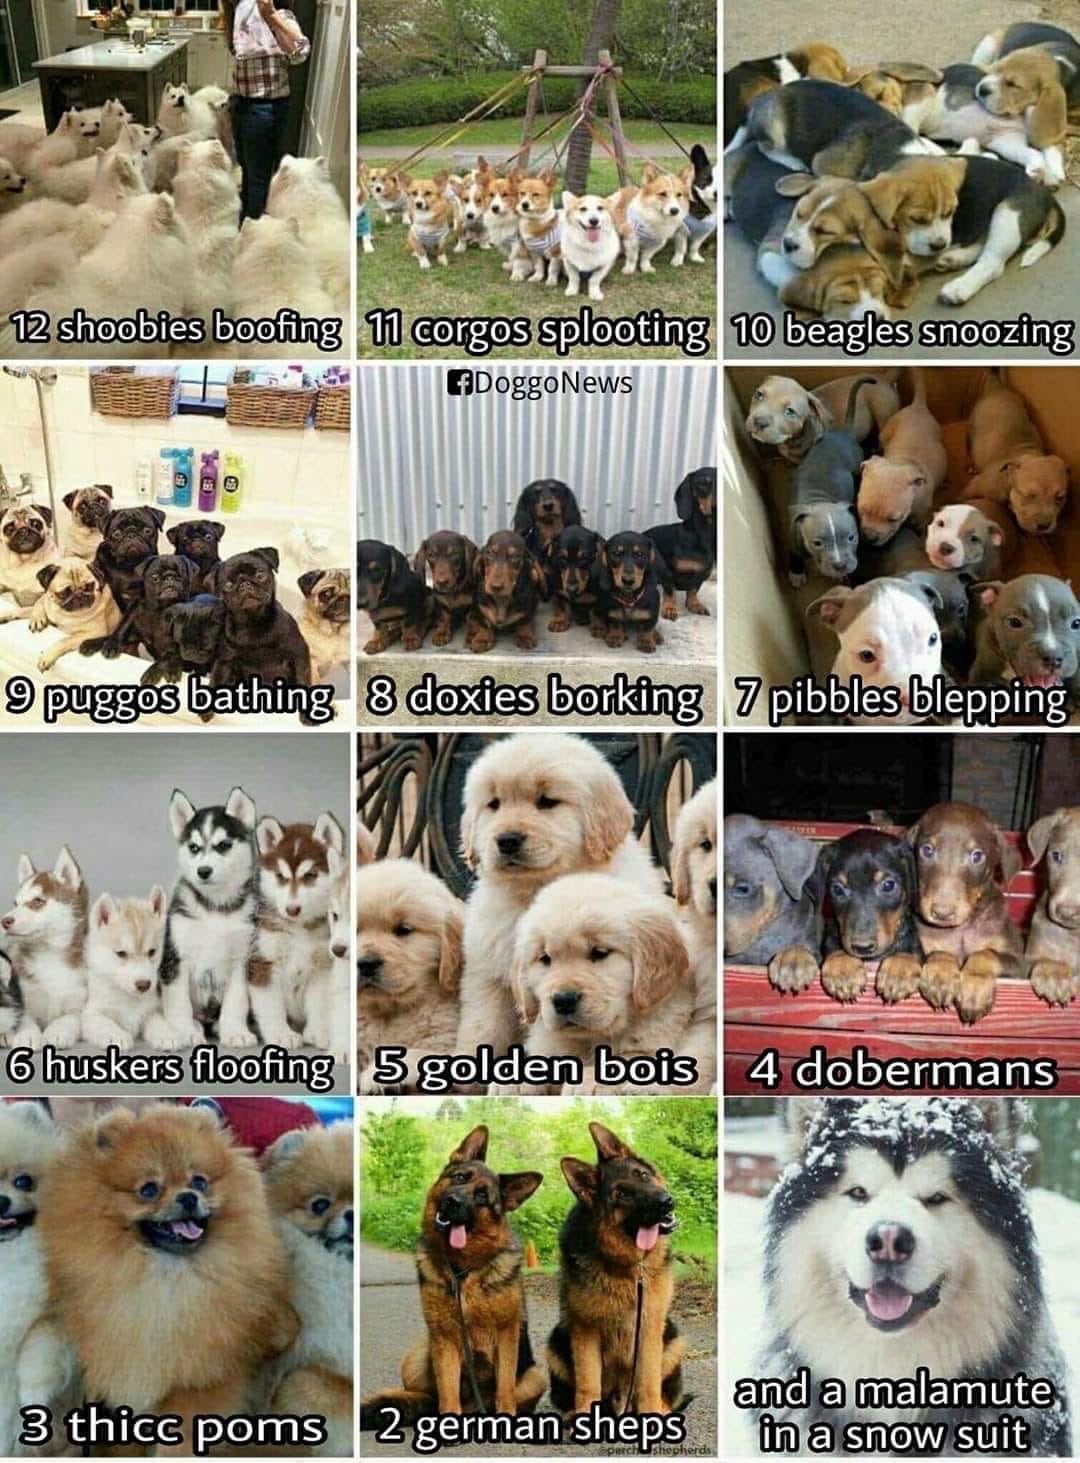 christmas meme - twelve doggos of christmas - 12 shoobies boofing 11 corgos splooting 10 beagles snoozing 9 puggos bathing 8 doxies borking 7 pibbles blepping 6 huskers floofing 5 golden bois 4 dobermans 3 thicc poms 2 german sheps and a malamute, in a sn